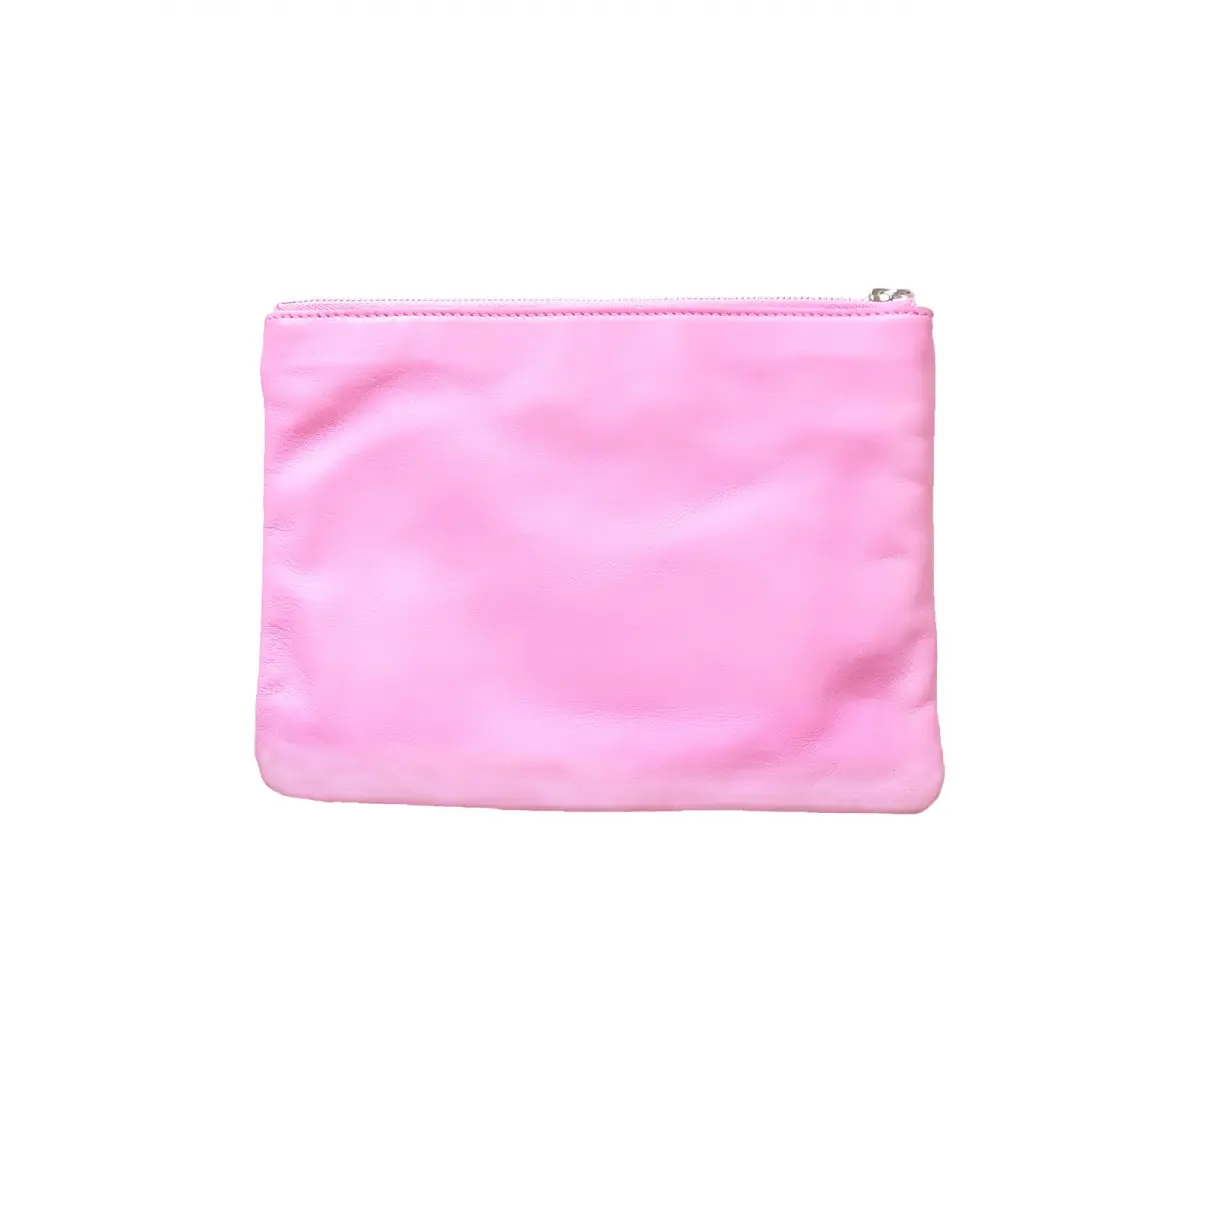 Christopher Kane Leather clutch bag for sale